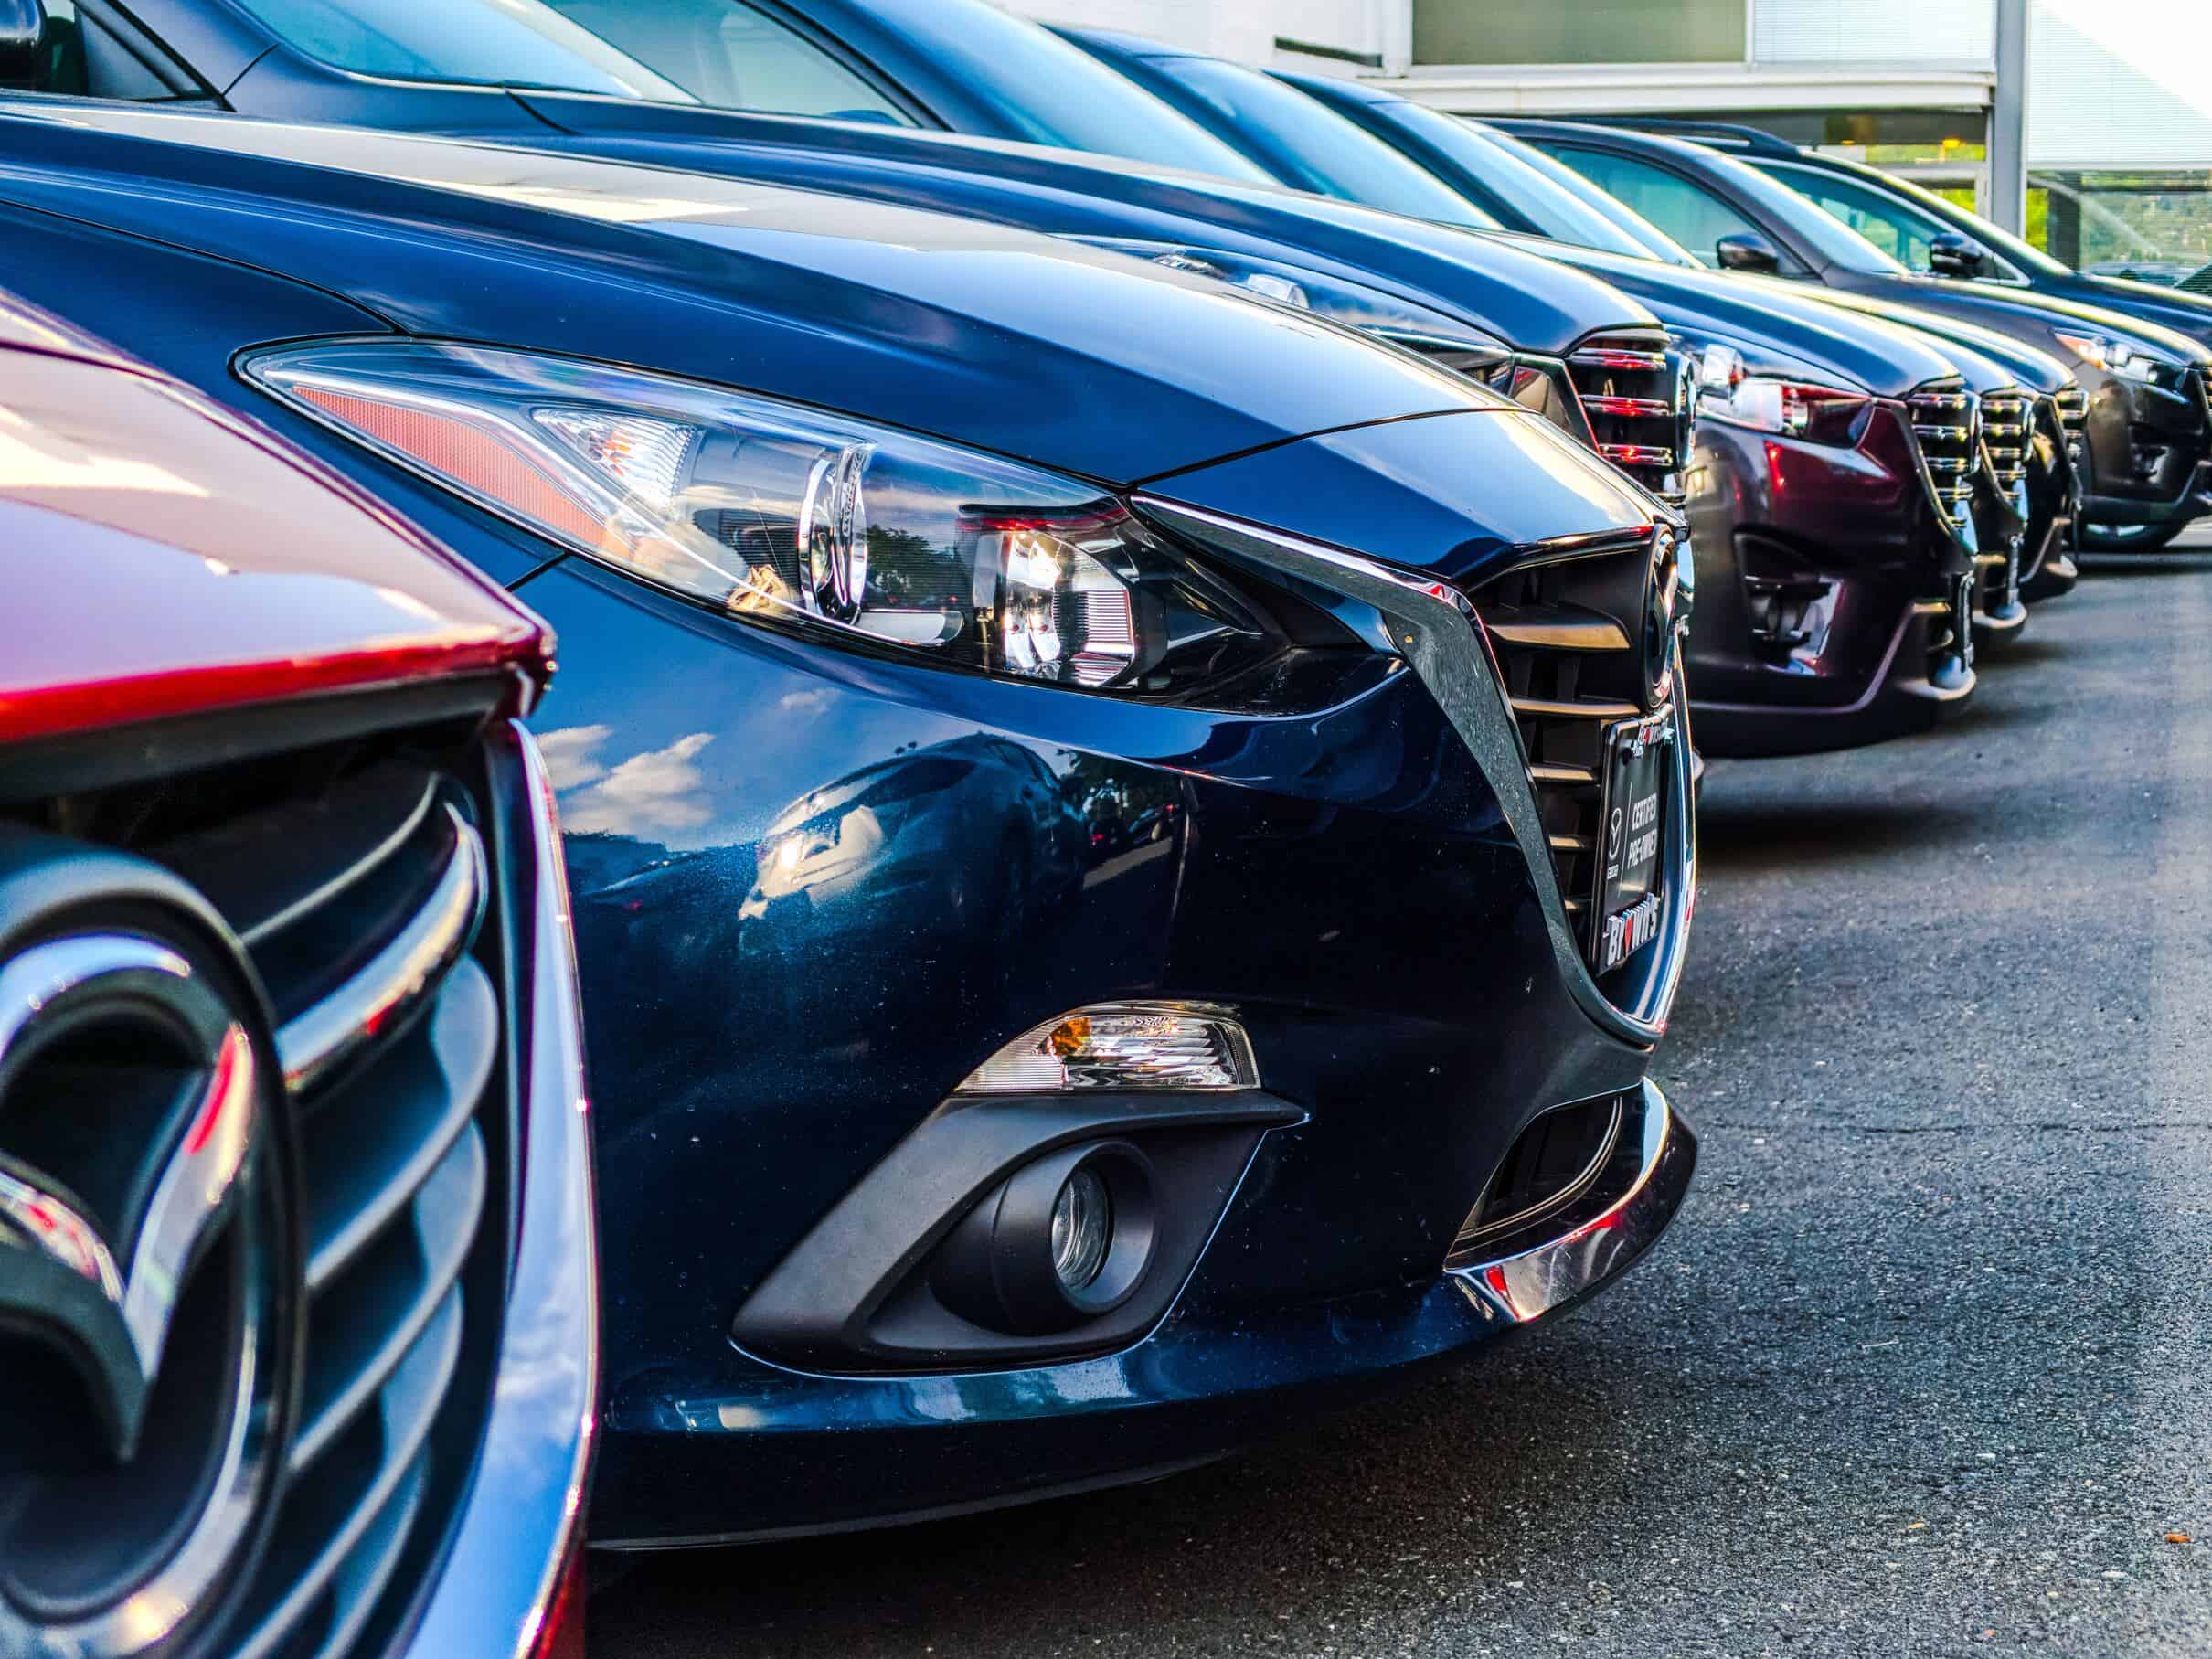 Image of a line-up of used cars at a dealership